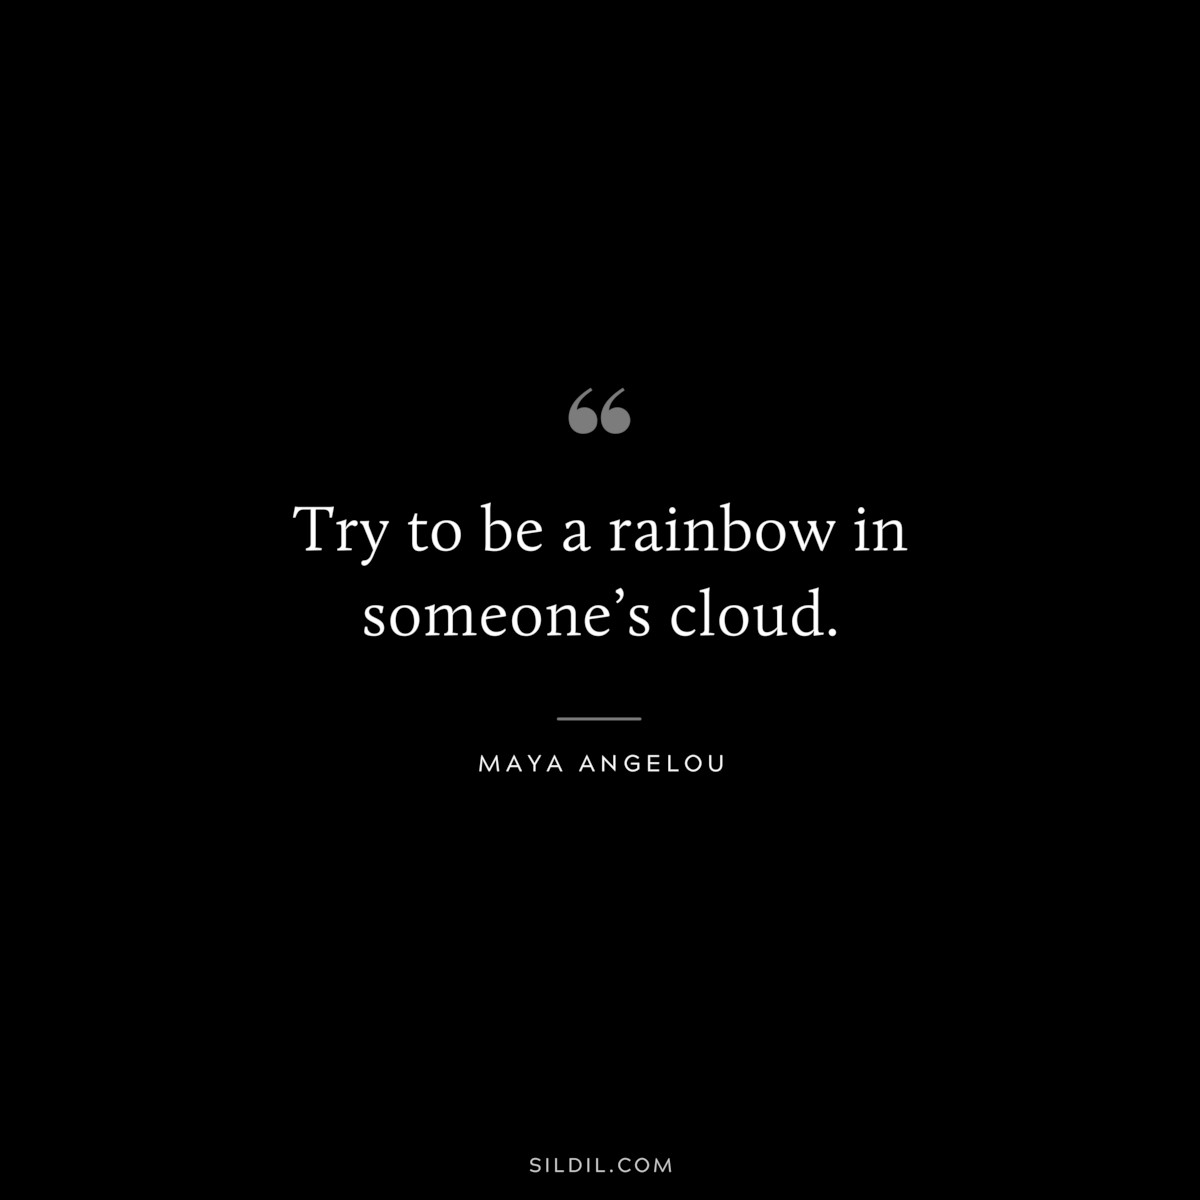 Try to be a rainbow in someone’s cloud. ― Maya Angelou